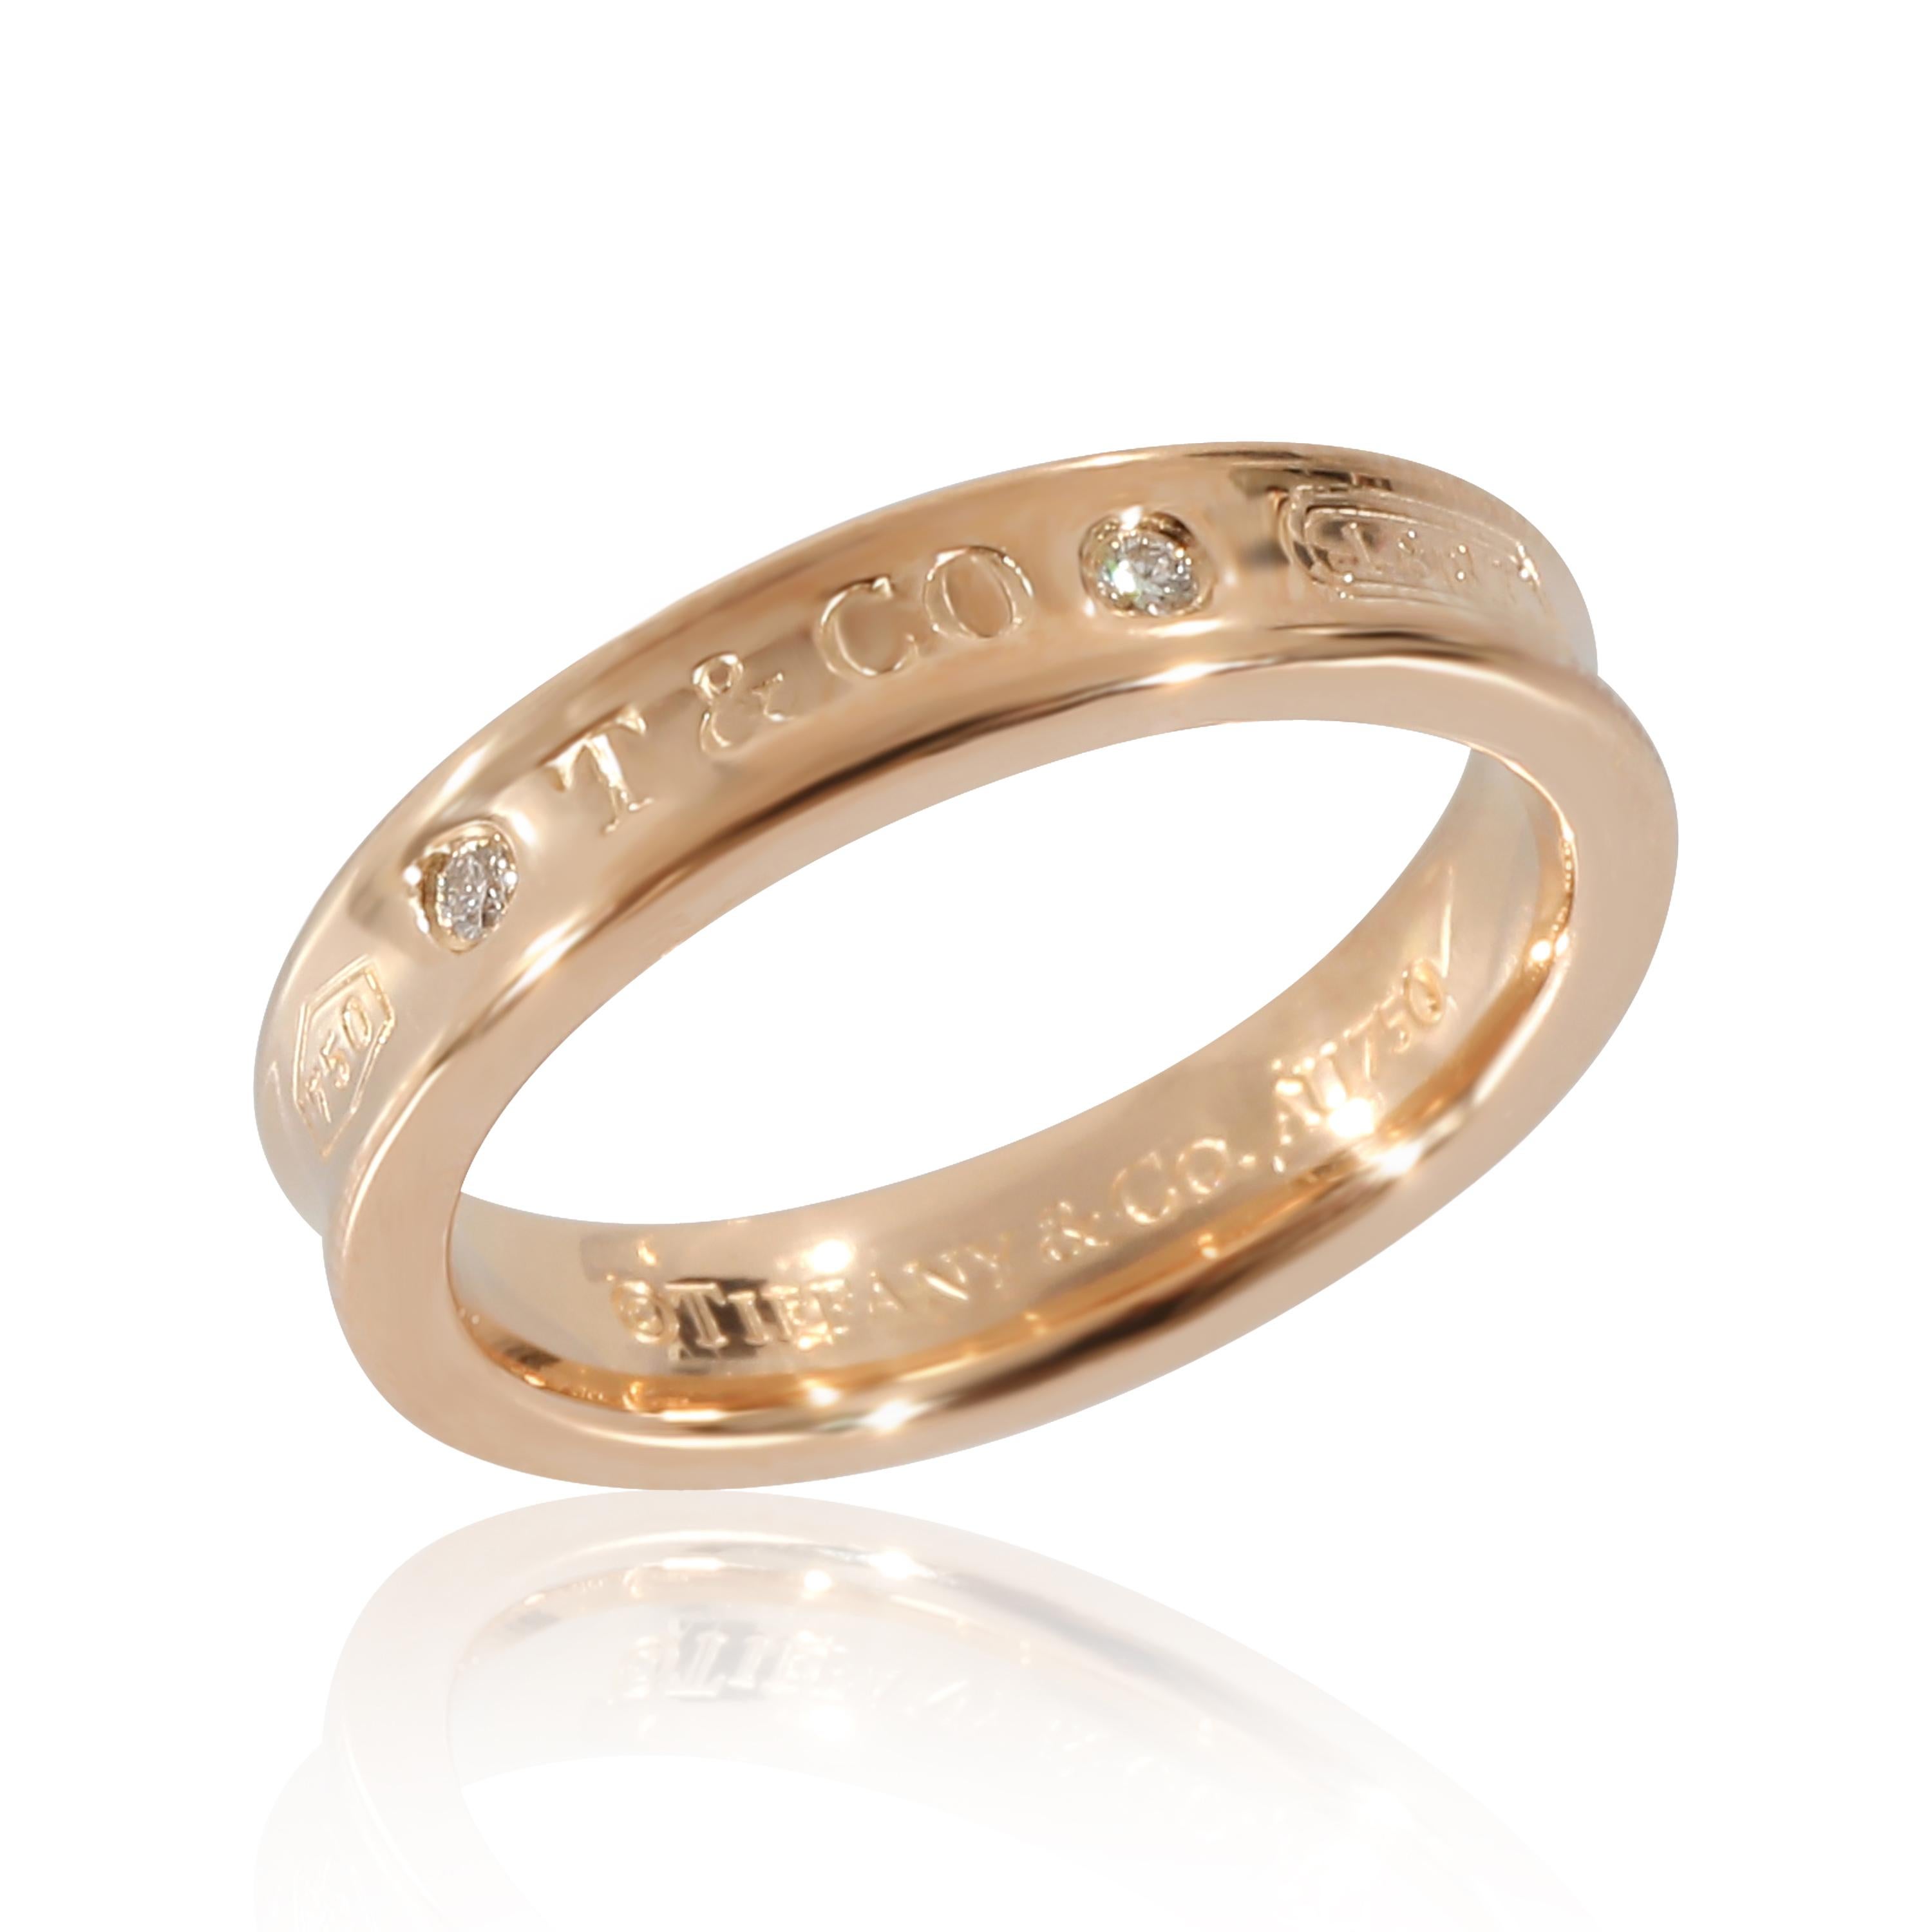 Tiffany & Co. 1837 Narrow Diamond Ring in 18K Rose Gold 0.02 CTW In Excellent Condition For Sale In New York, NY